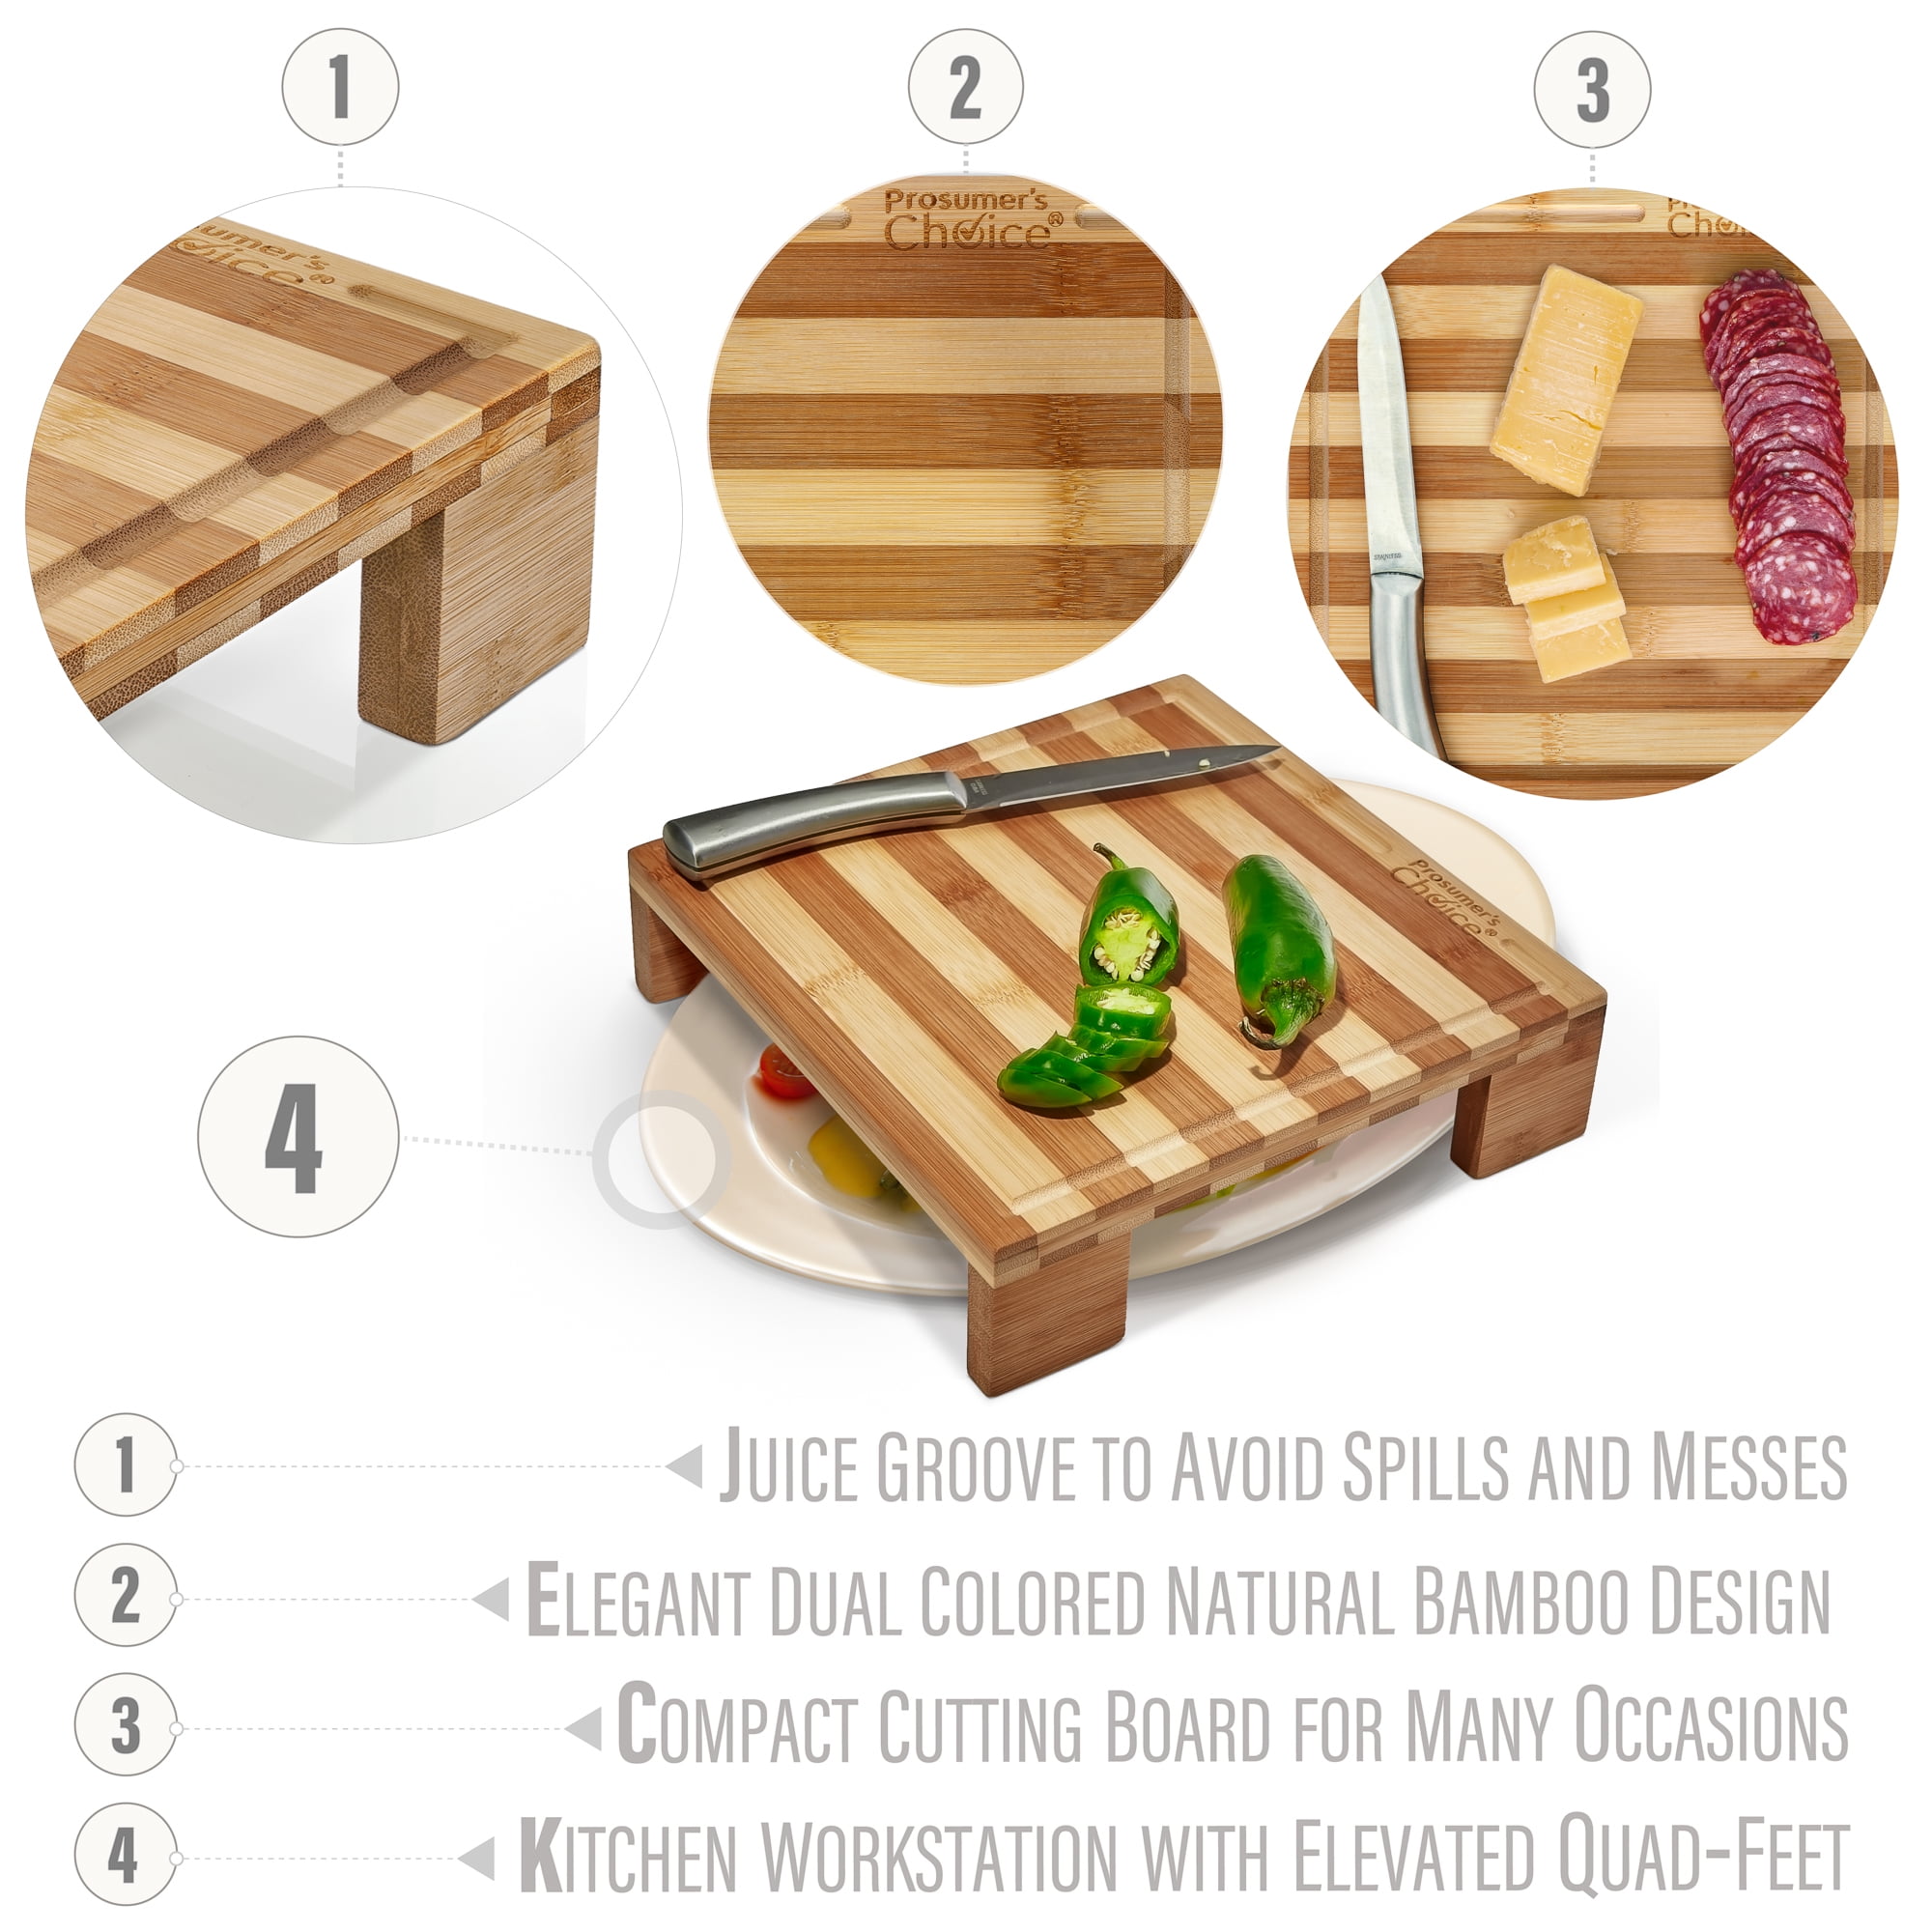  Prosumer's Choice Stovetop Cover Bamboo Cutting Board